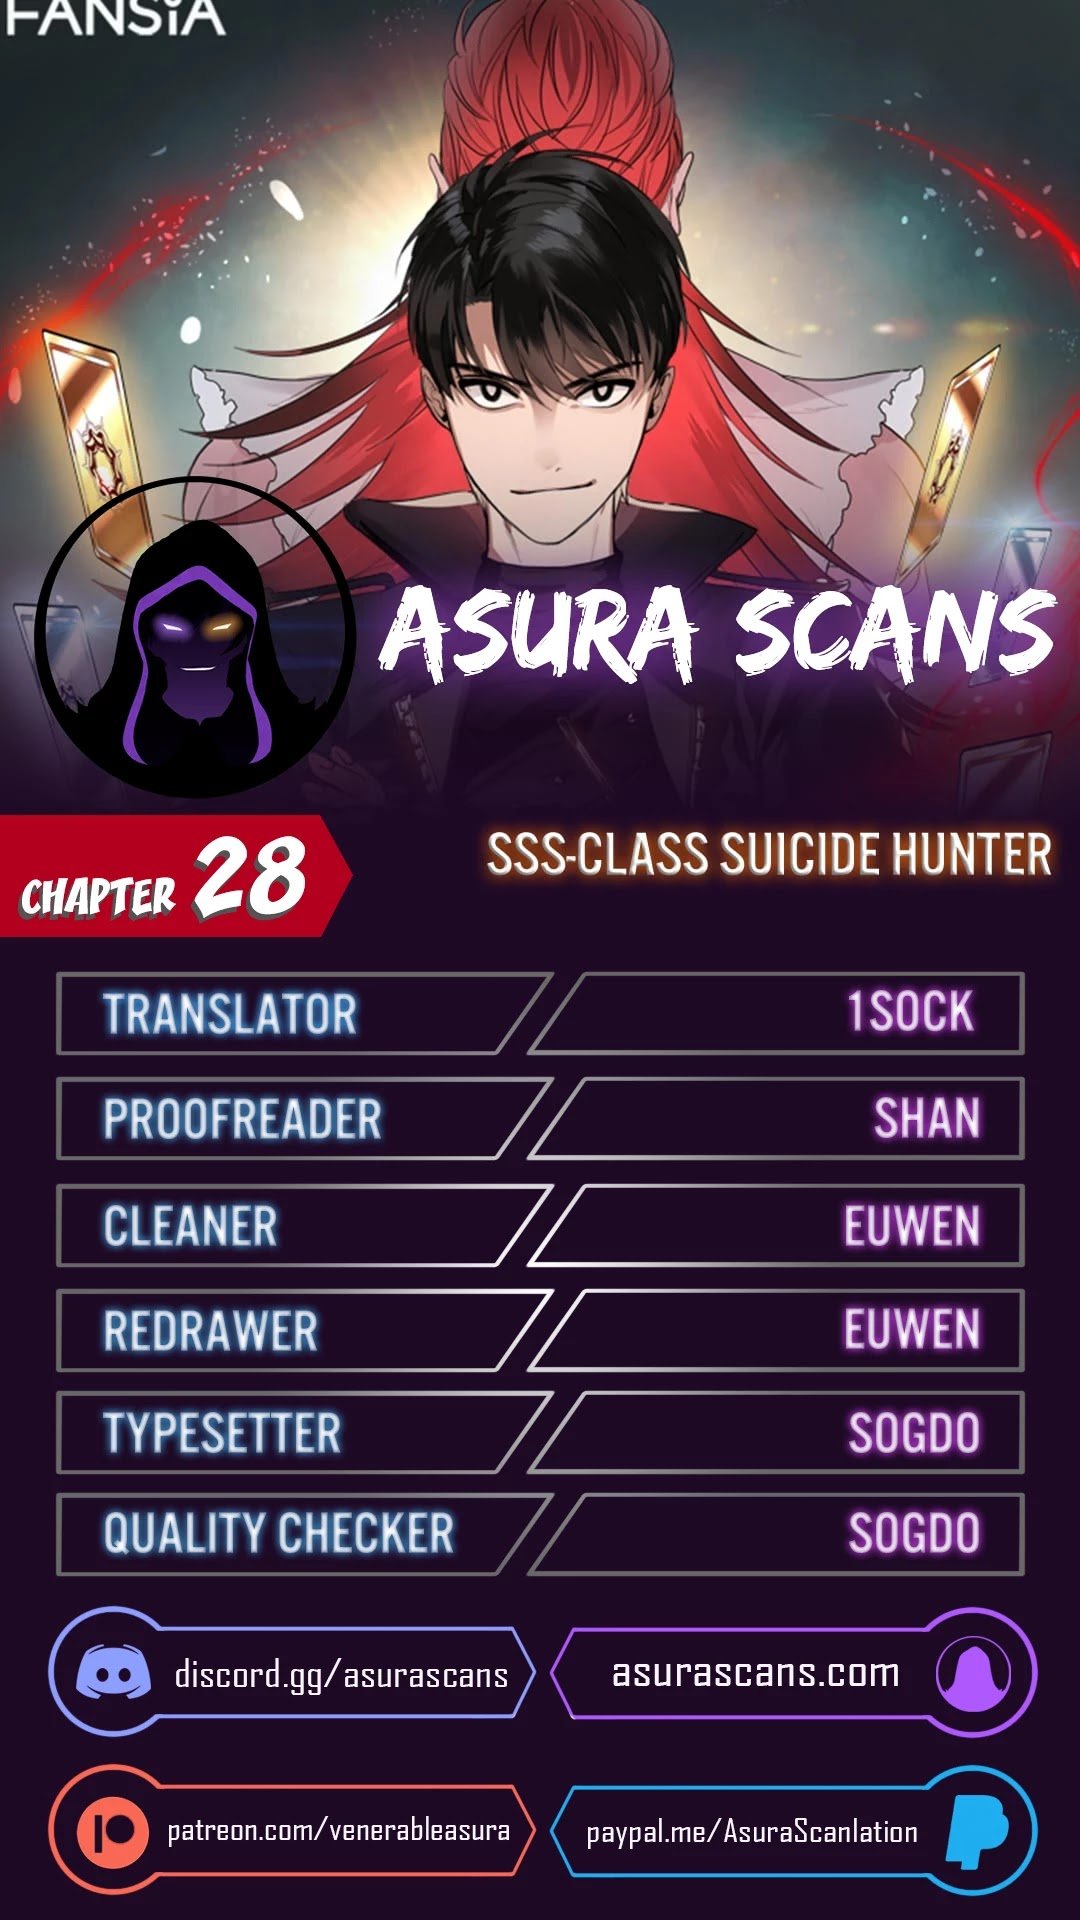 SSS-Class Suicide Hunter chapter 28